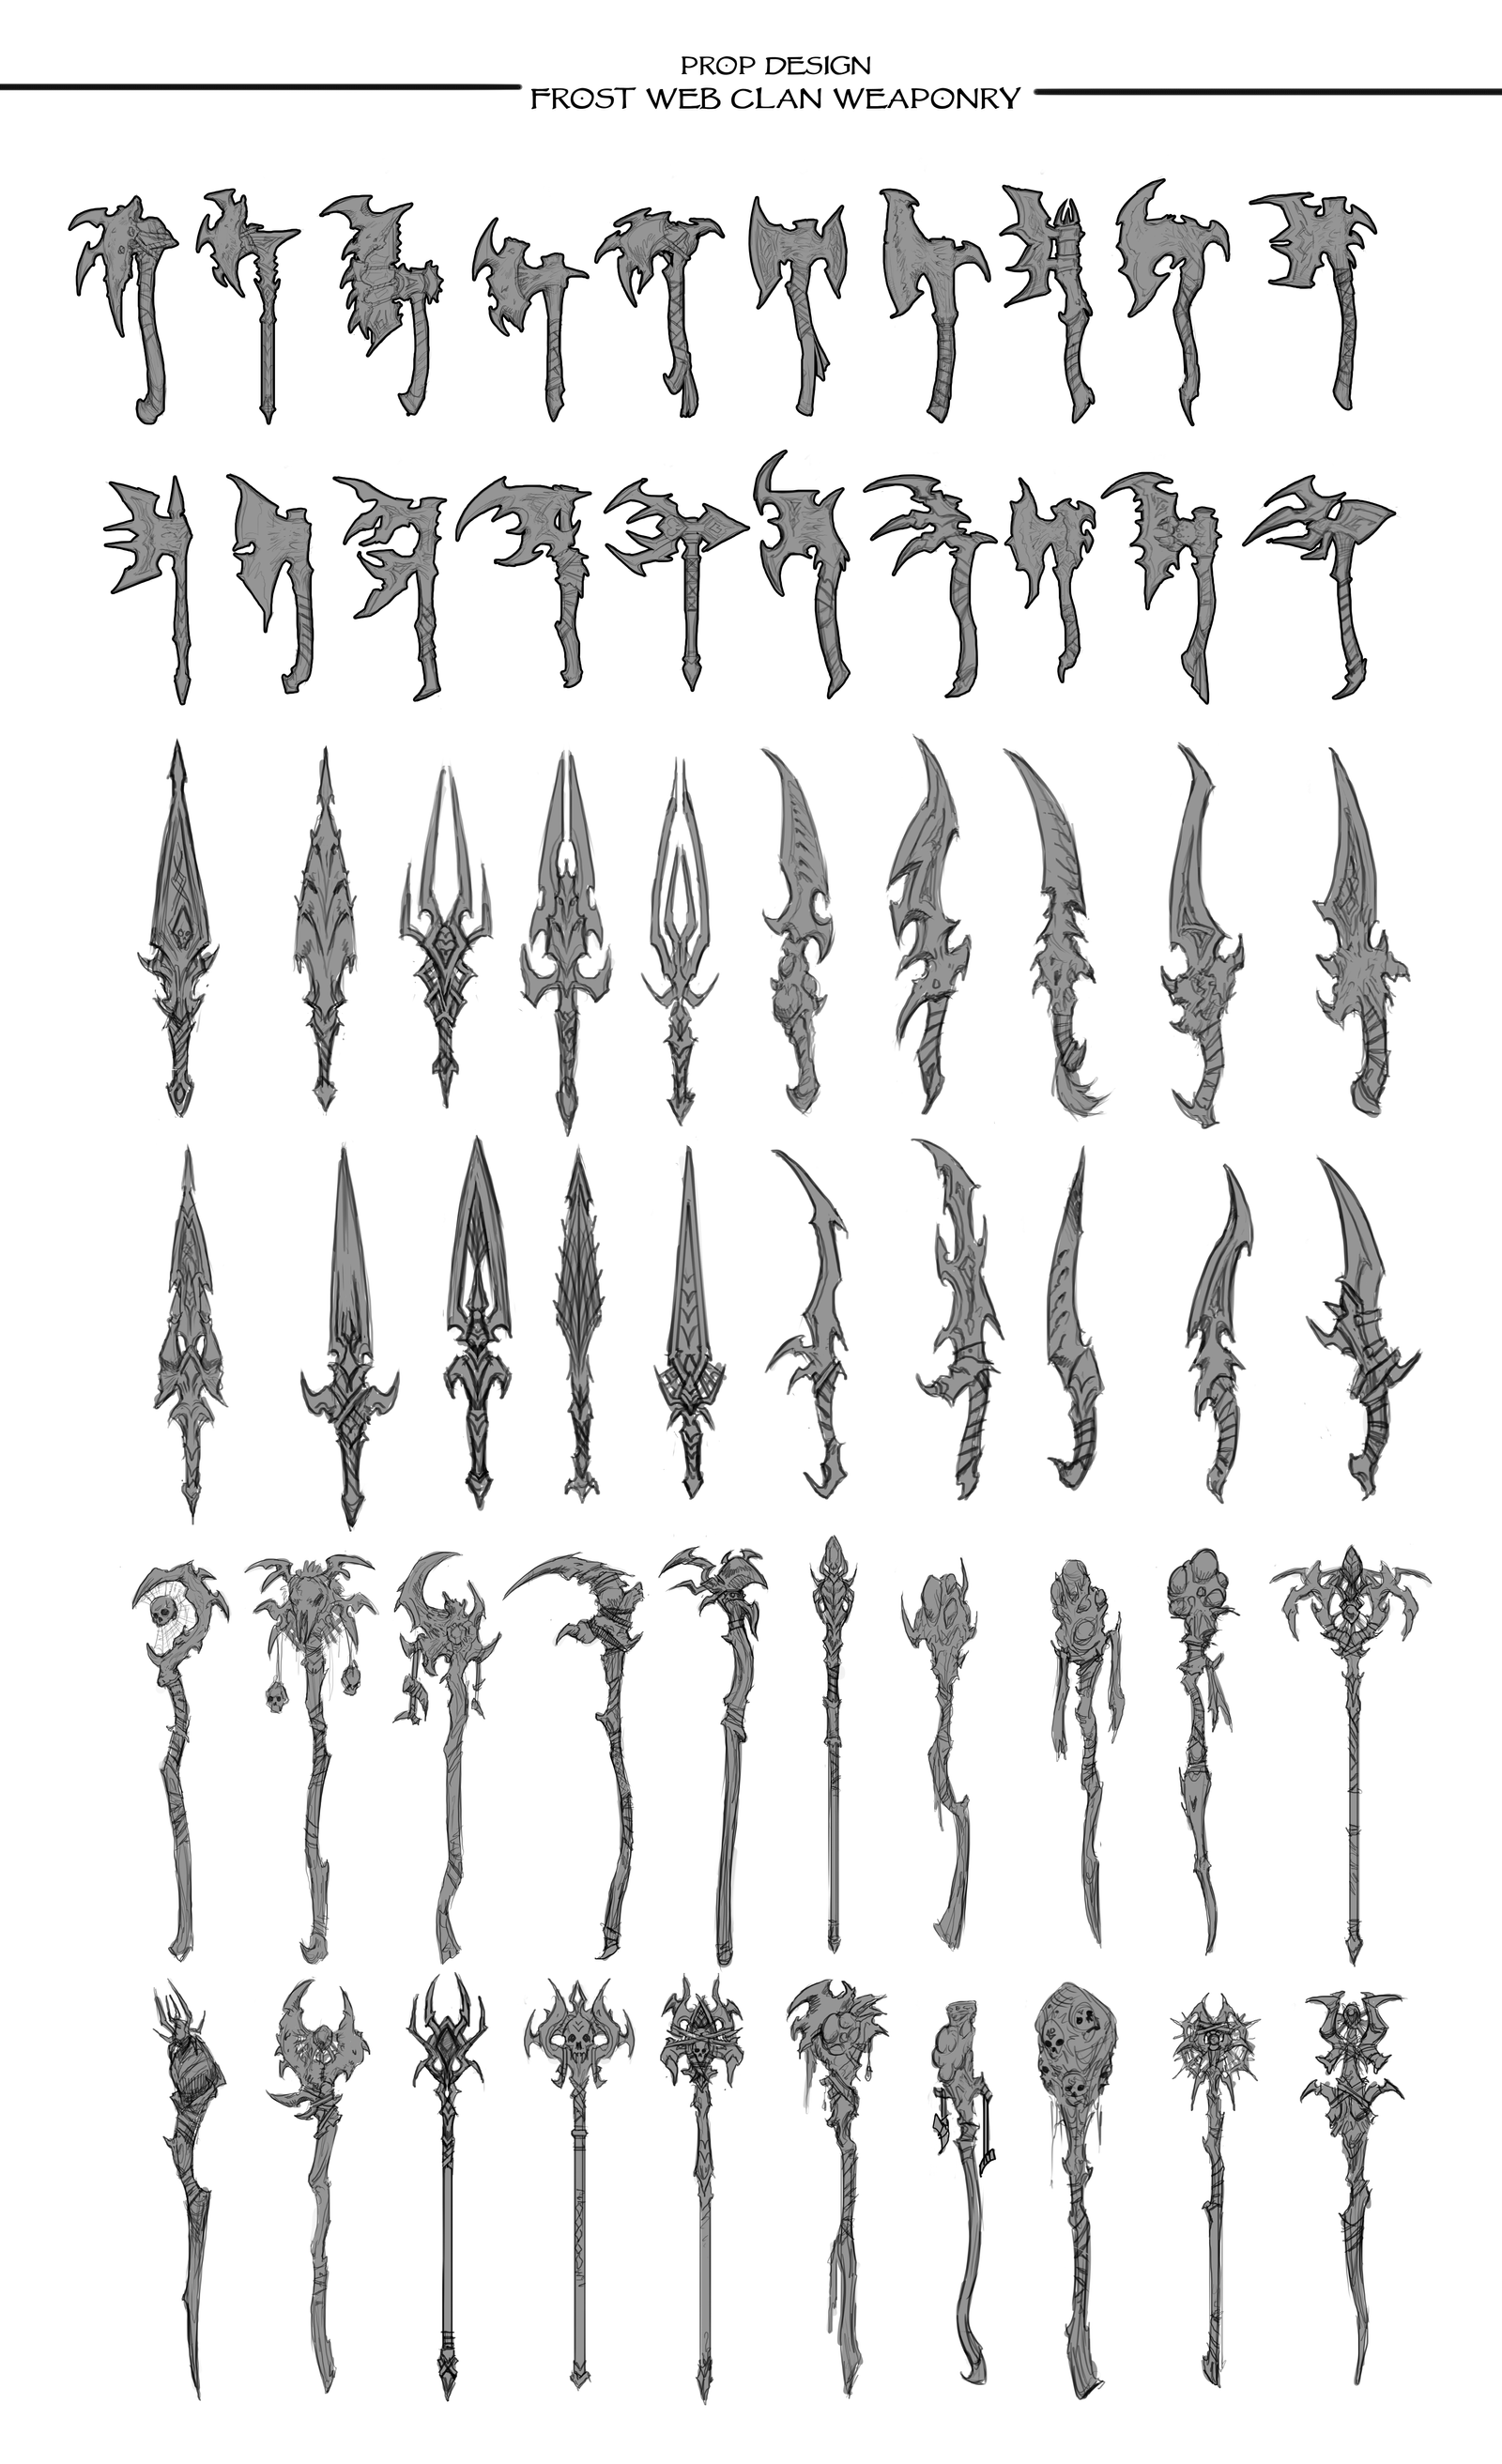 Clan Frost Web Weapon Sketches